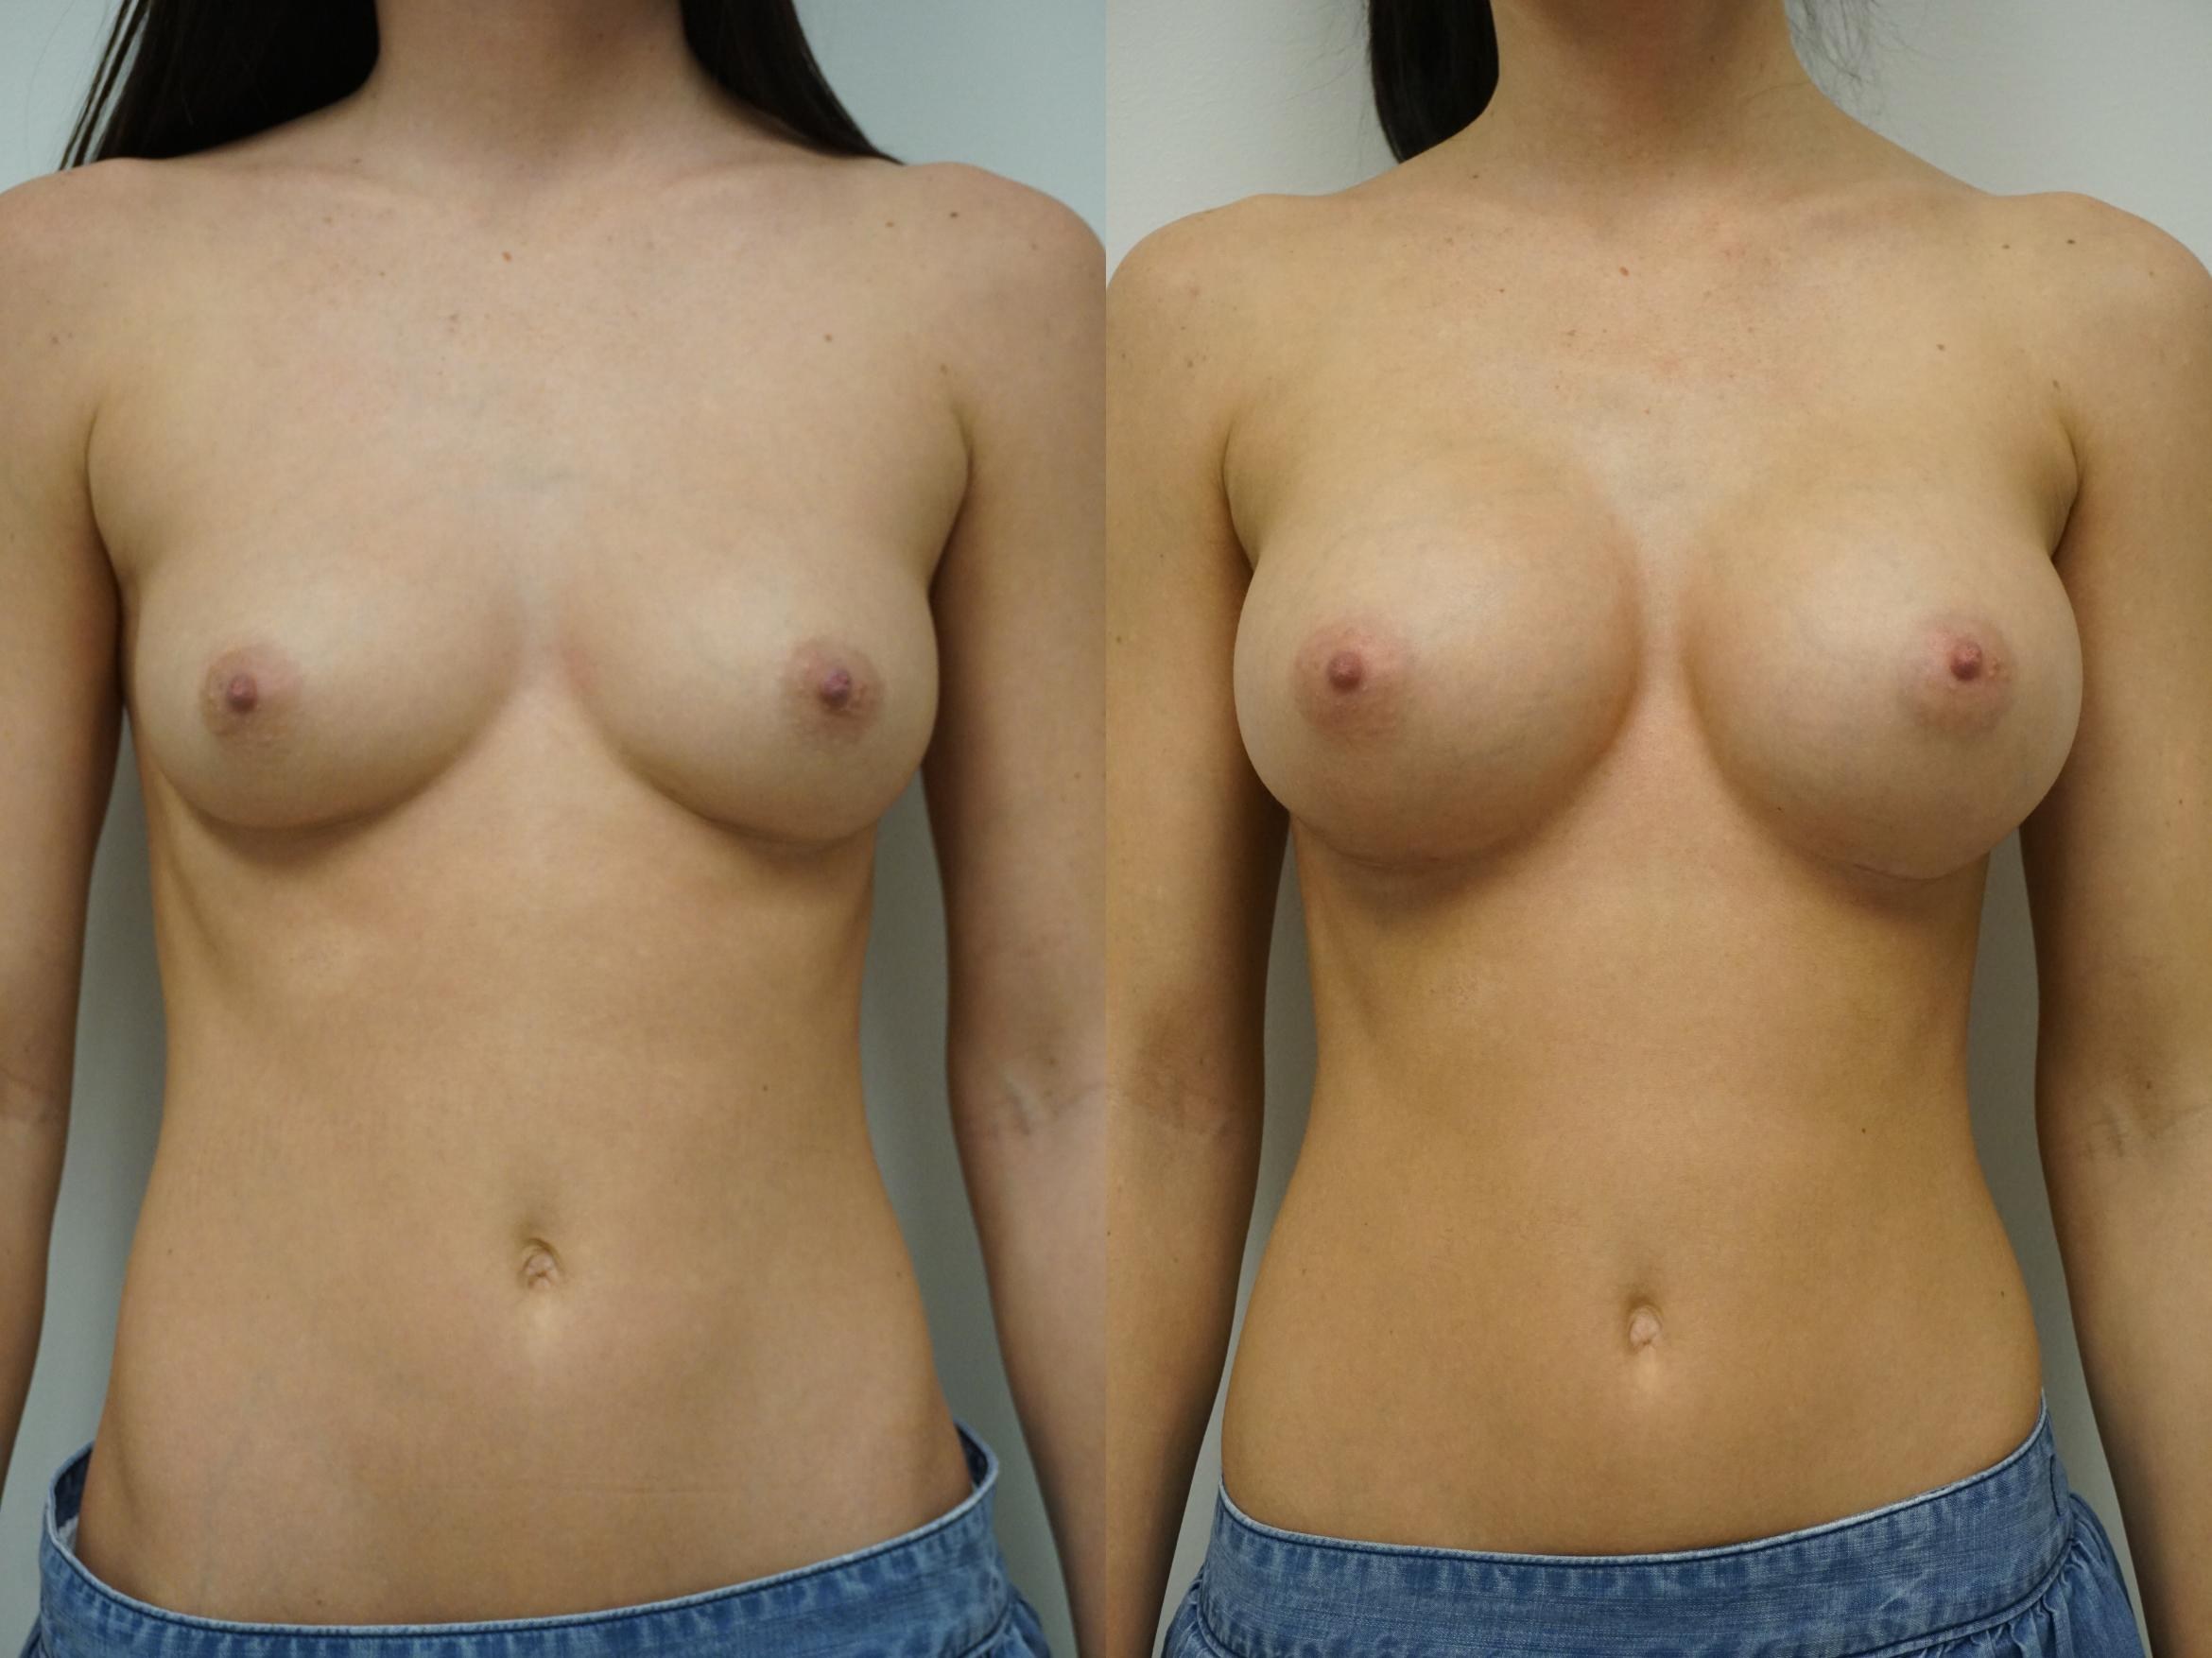 Porn Tits Before And After - Porno Boobs Before and after Plastic Surgery (62 photos) - porn photo